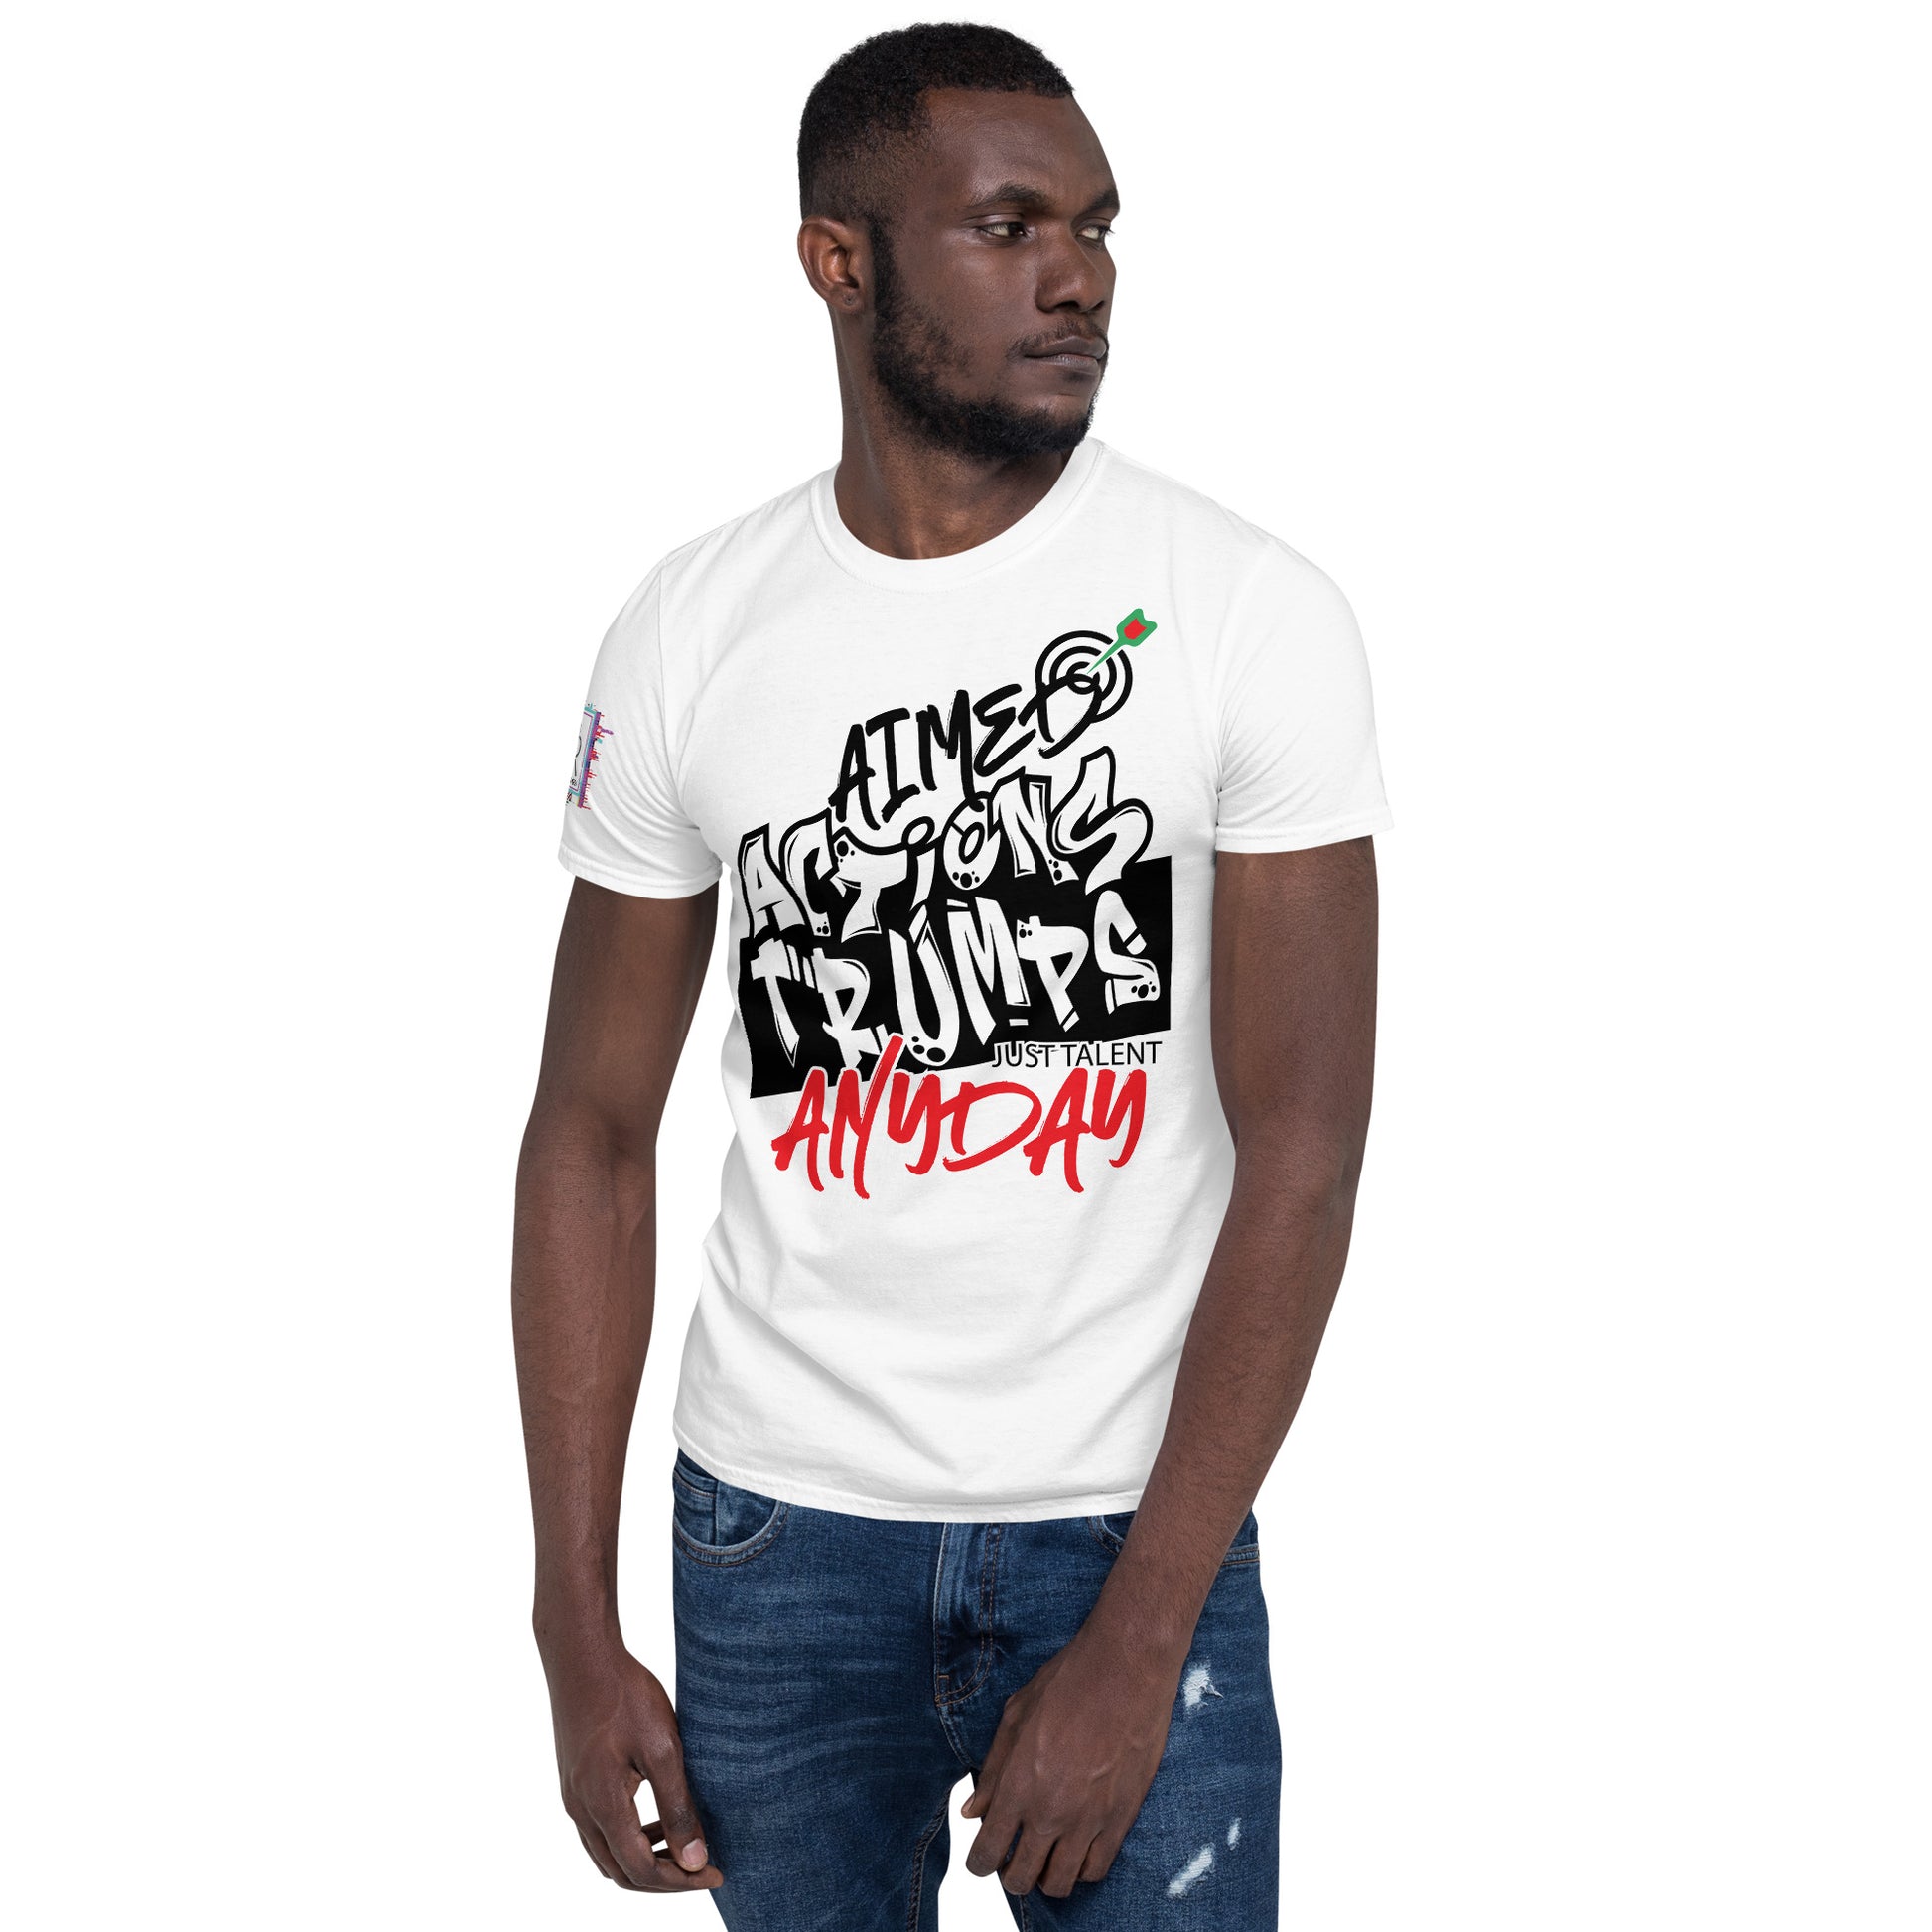 Aimed Actions Trumps Just Talent Any day Unisex Graphic T-Shirt-Graphic Tee-Digital Rawness